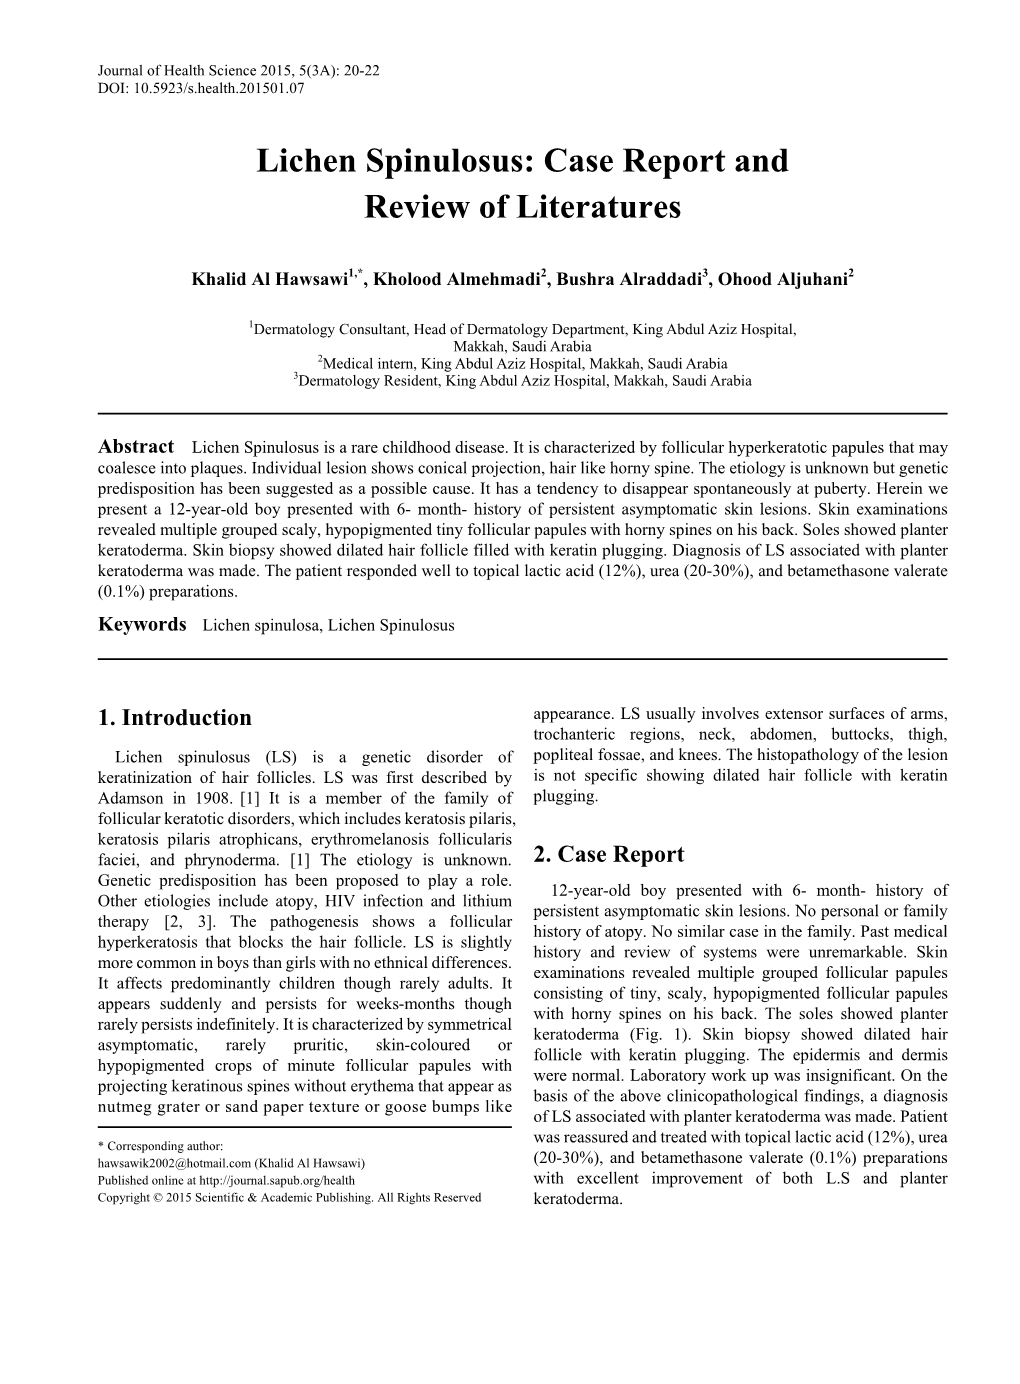 Lichen Spinulosus: Case Report and Review of Literatures